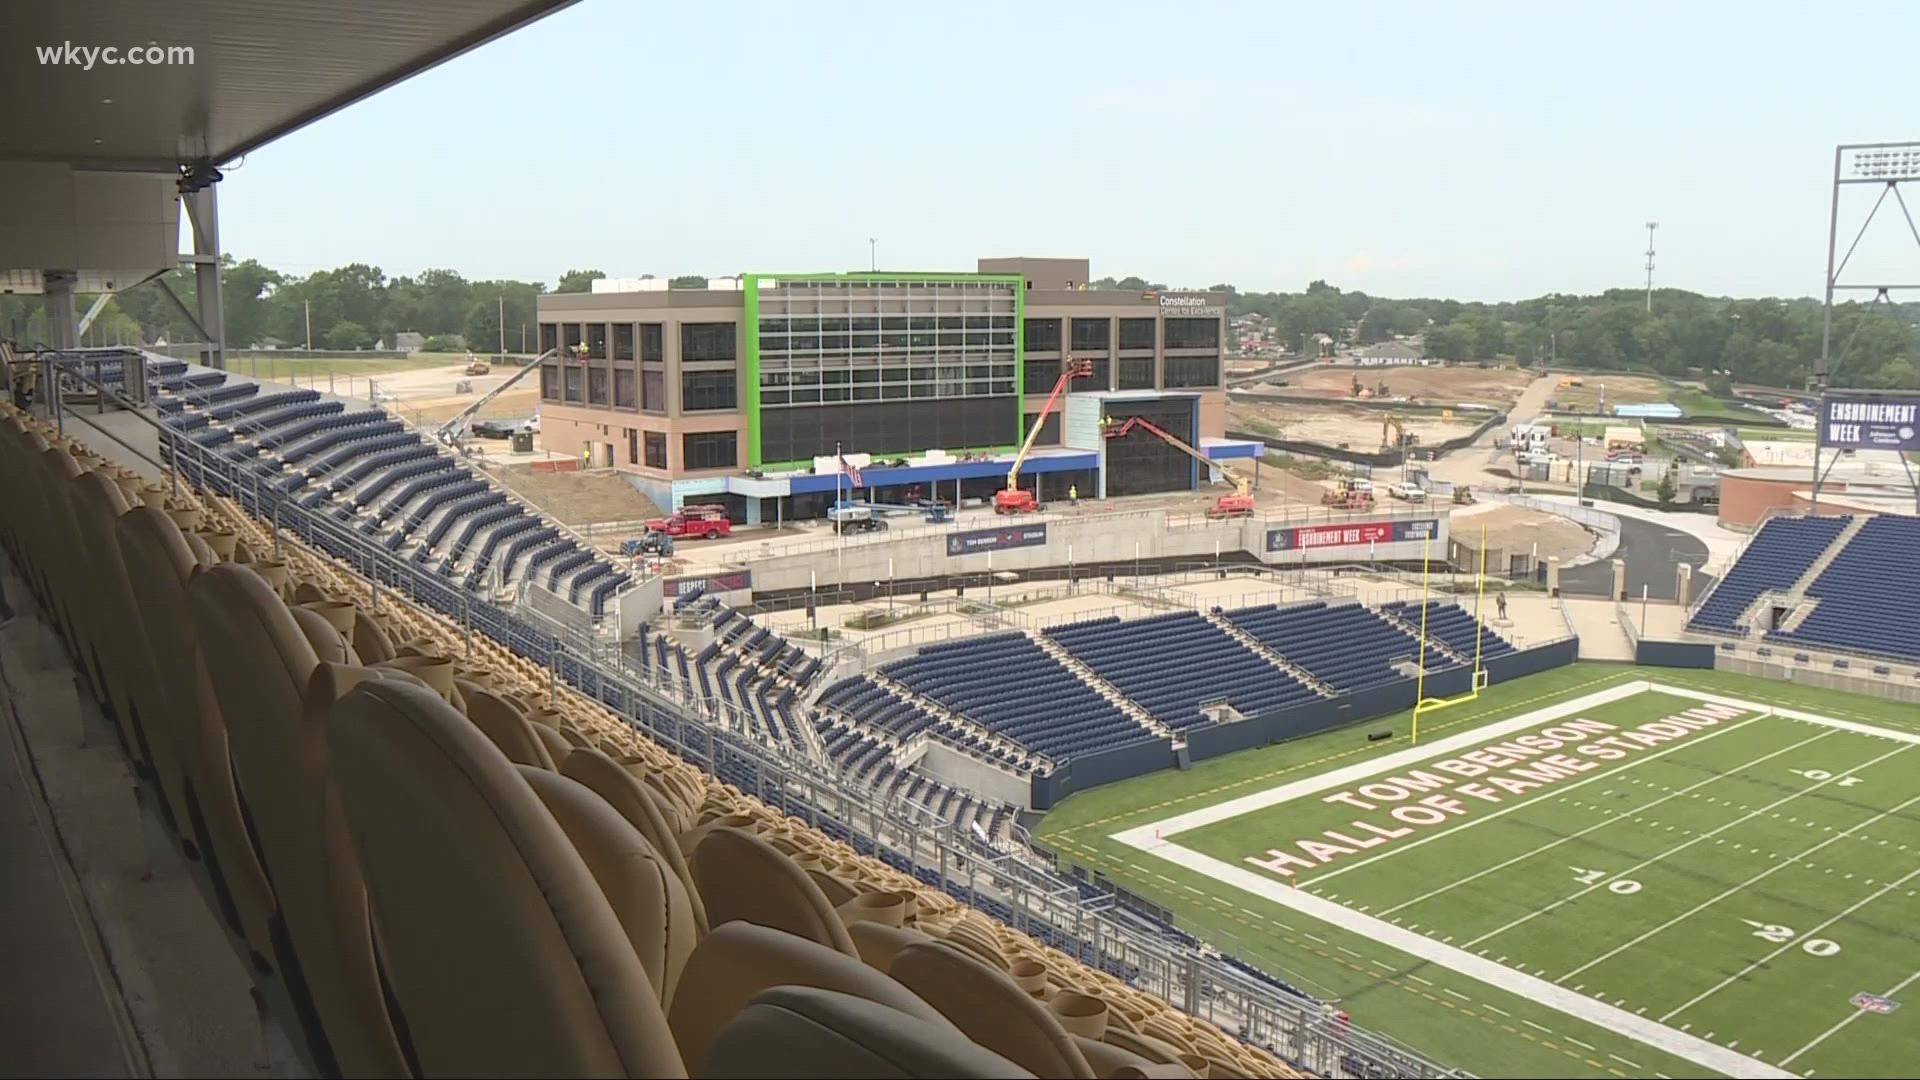 An exciting time in Canton.This year's Pro Football Hall of Fame Enshrinement week is just a week away with thousands of fans expected to visit for the festival.